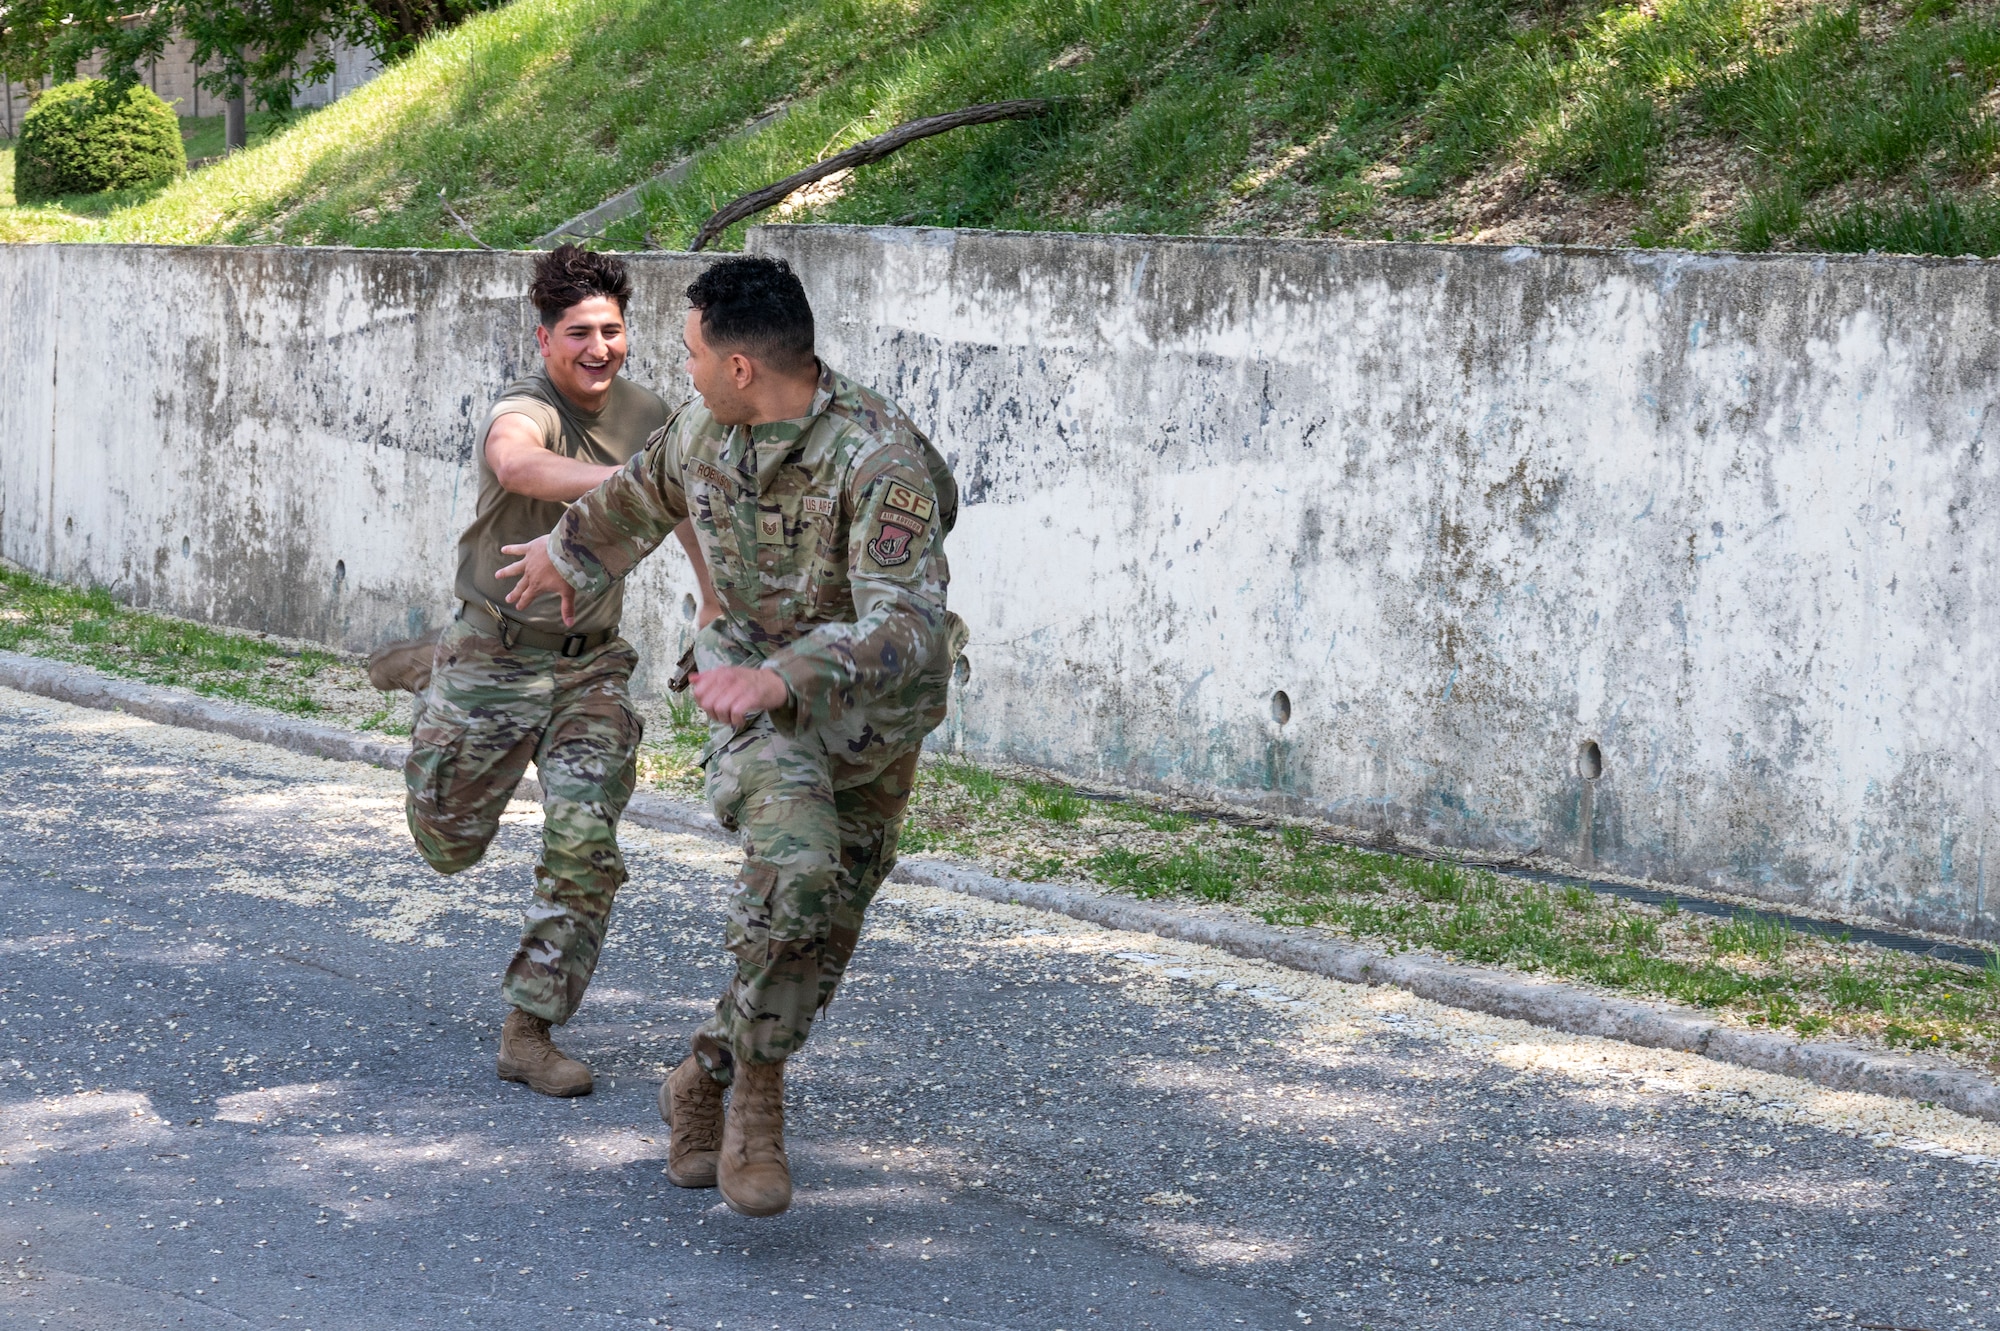 U.S. Air Force Airman 1st Class Daniel Martinez and U.S. Air Force Tech. Sgt. Joseph Robinson, 51st Security Forces Squadron Defenders, run the relay portion of the Defenders challenge as a part of Police Week 2023 on Osan Air Base, Republic of Korea, May 17, 2023. Four-person teams competed in various timed challenges related to the Defender Experience. The challenge was part of  Police Week 2023 activities.(U.S. Air Force photo by Airman 1st Class Aaron Edwards)